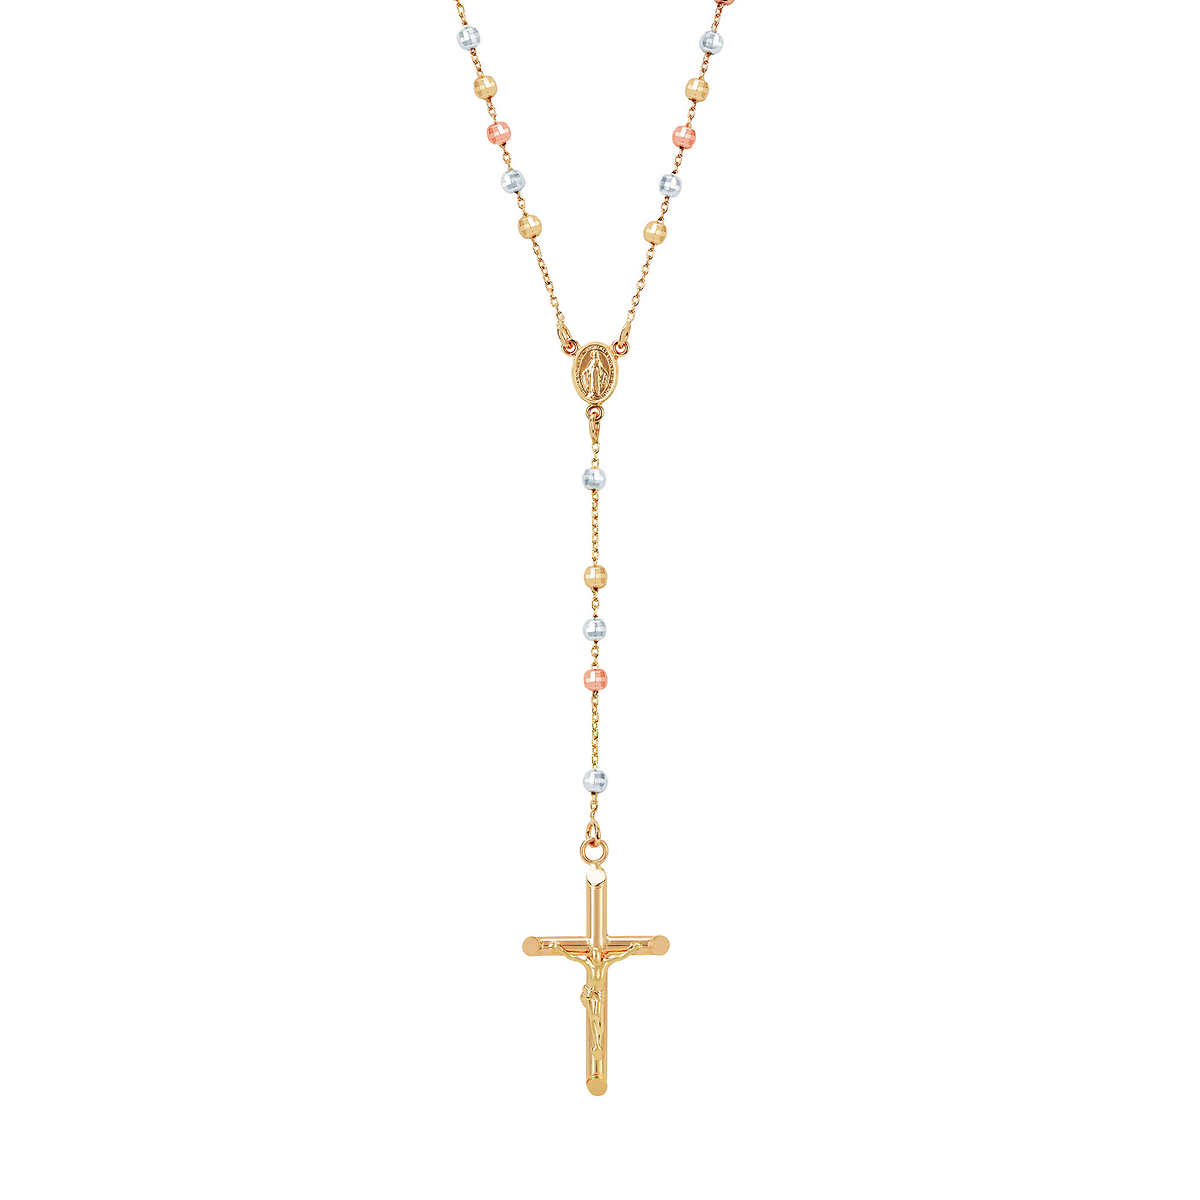 Polished Stainless Steel Rose Golden Tone Heart Wrapped Cross Pendant Necklace 